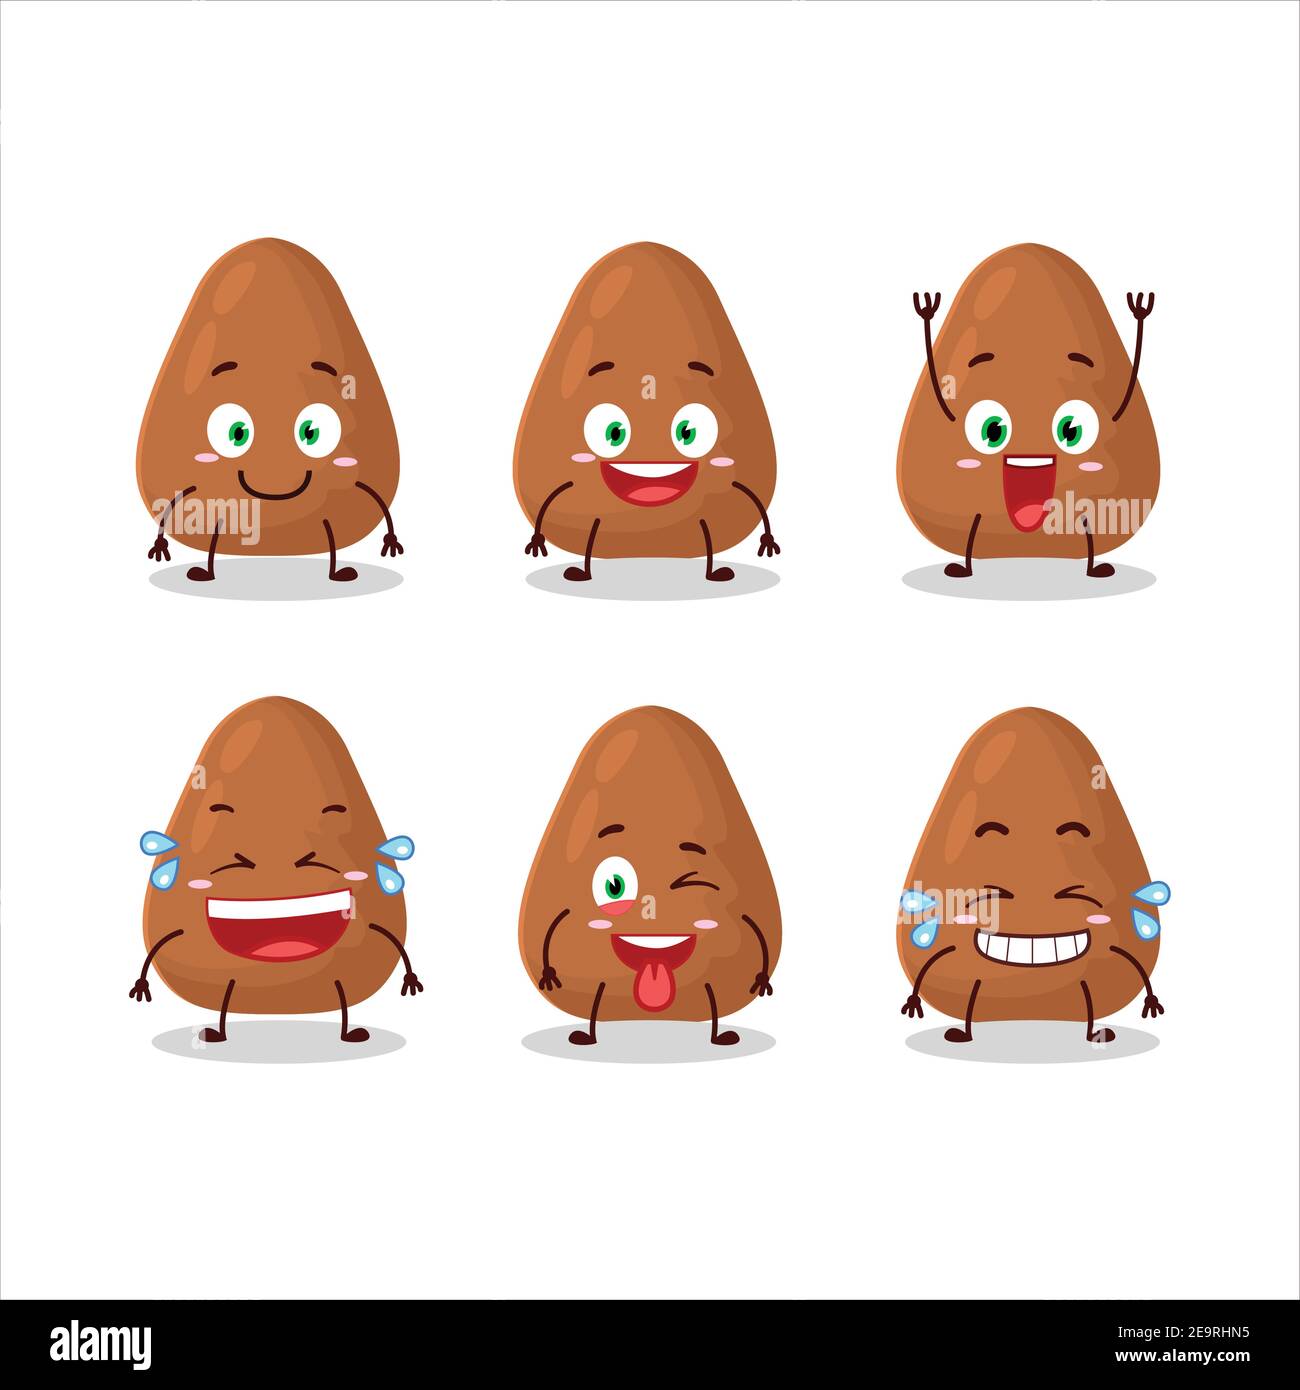 Cartoon character of mamey with smile expression. Vector illustration Stock Vector